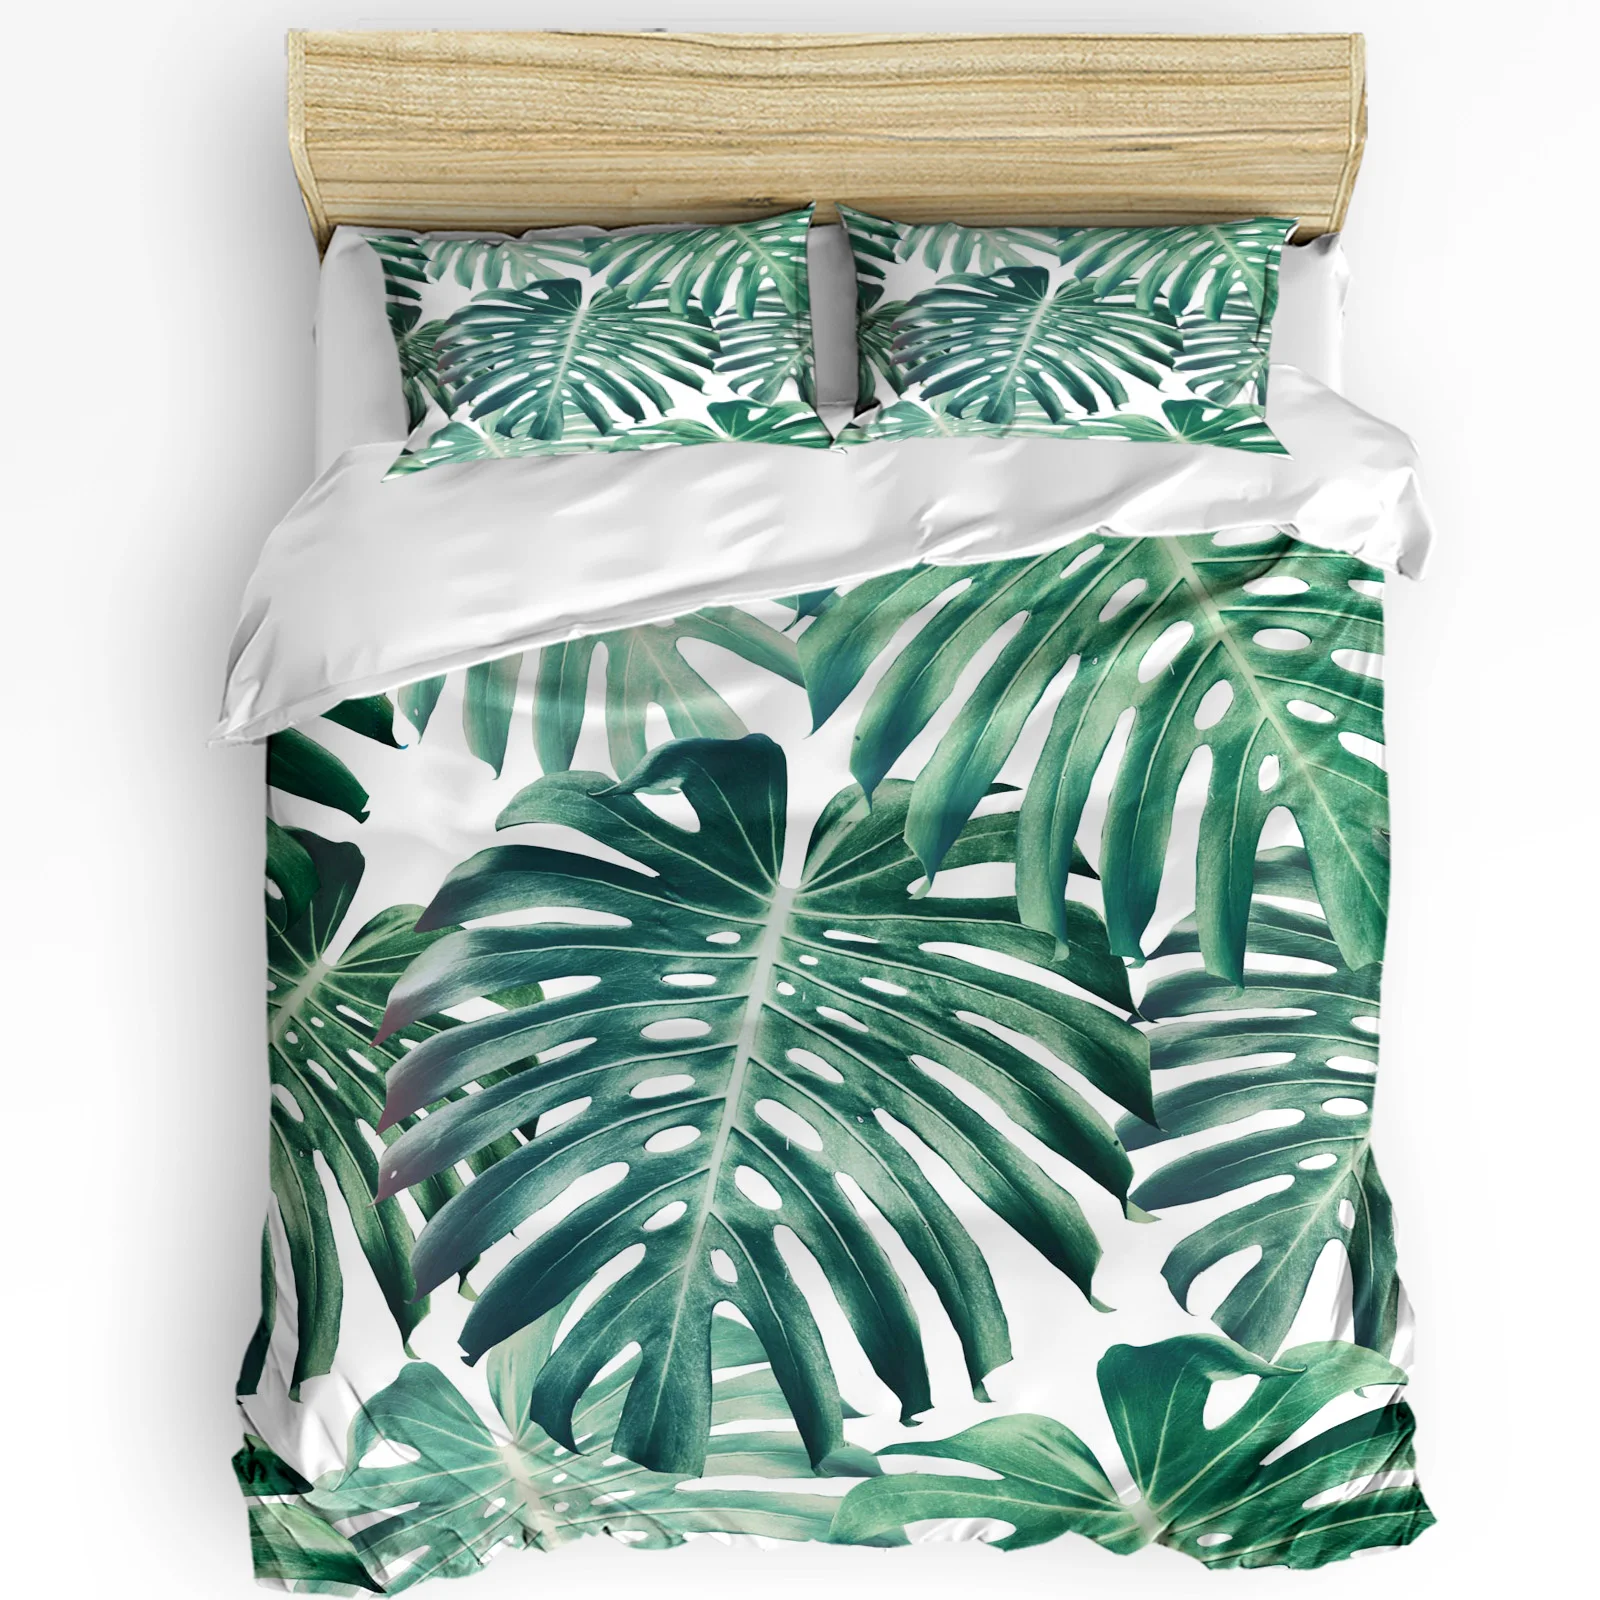 

Green Turtle Tropical Plant Palm Leave 3pcs Bedding Set For Bedroom Double Bed Home Textile Duvet Cover Quilt Cover Pillowcase